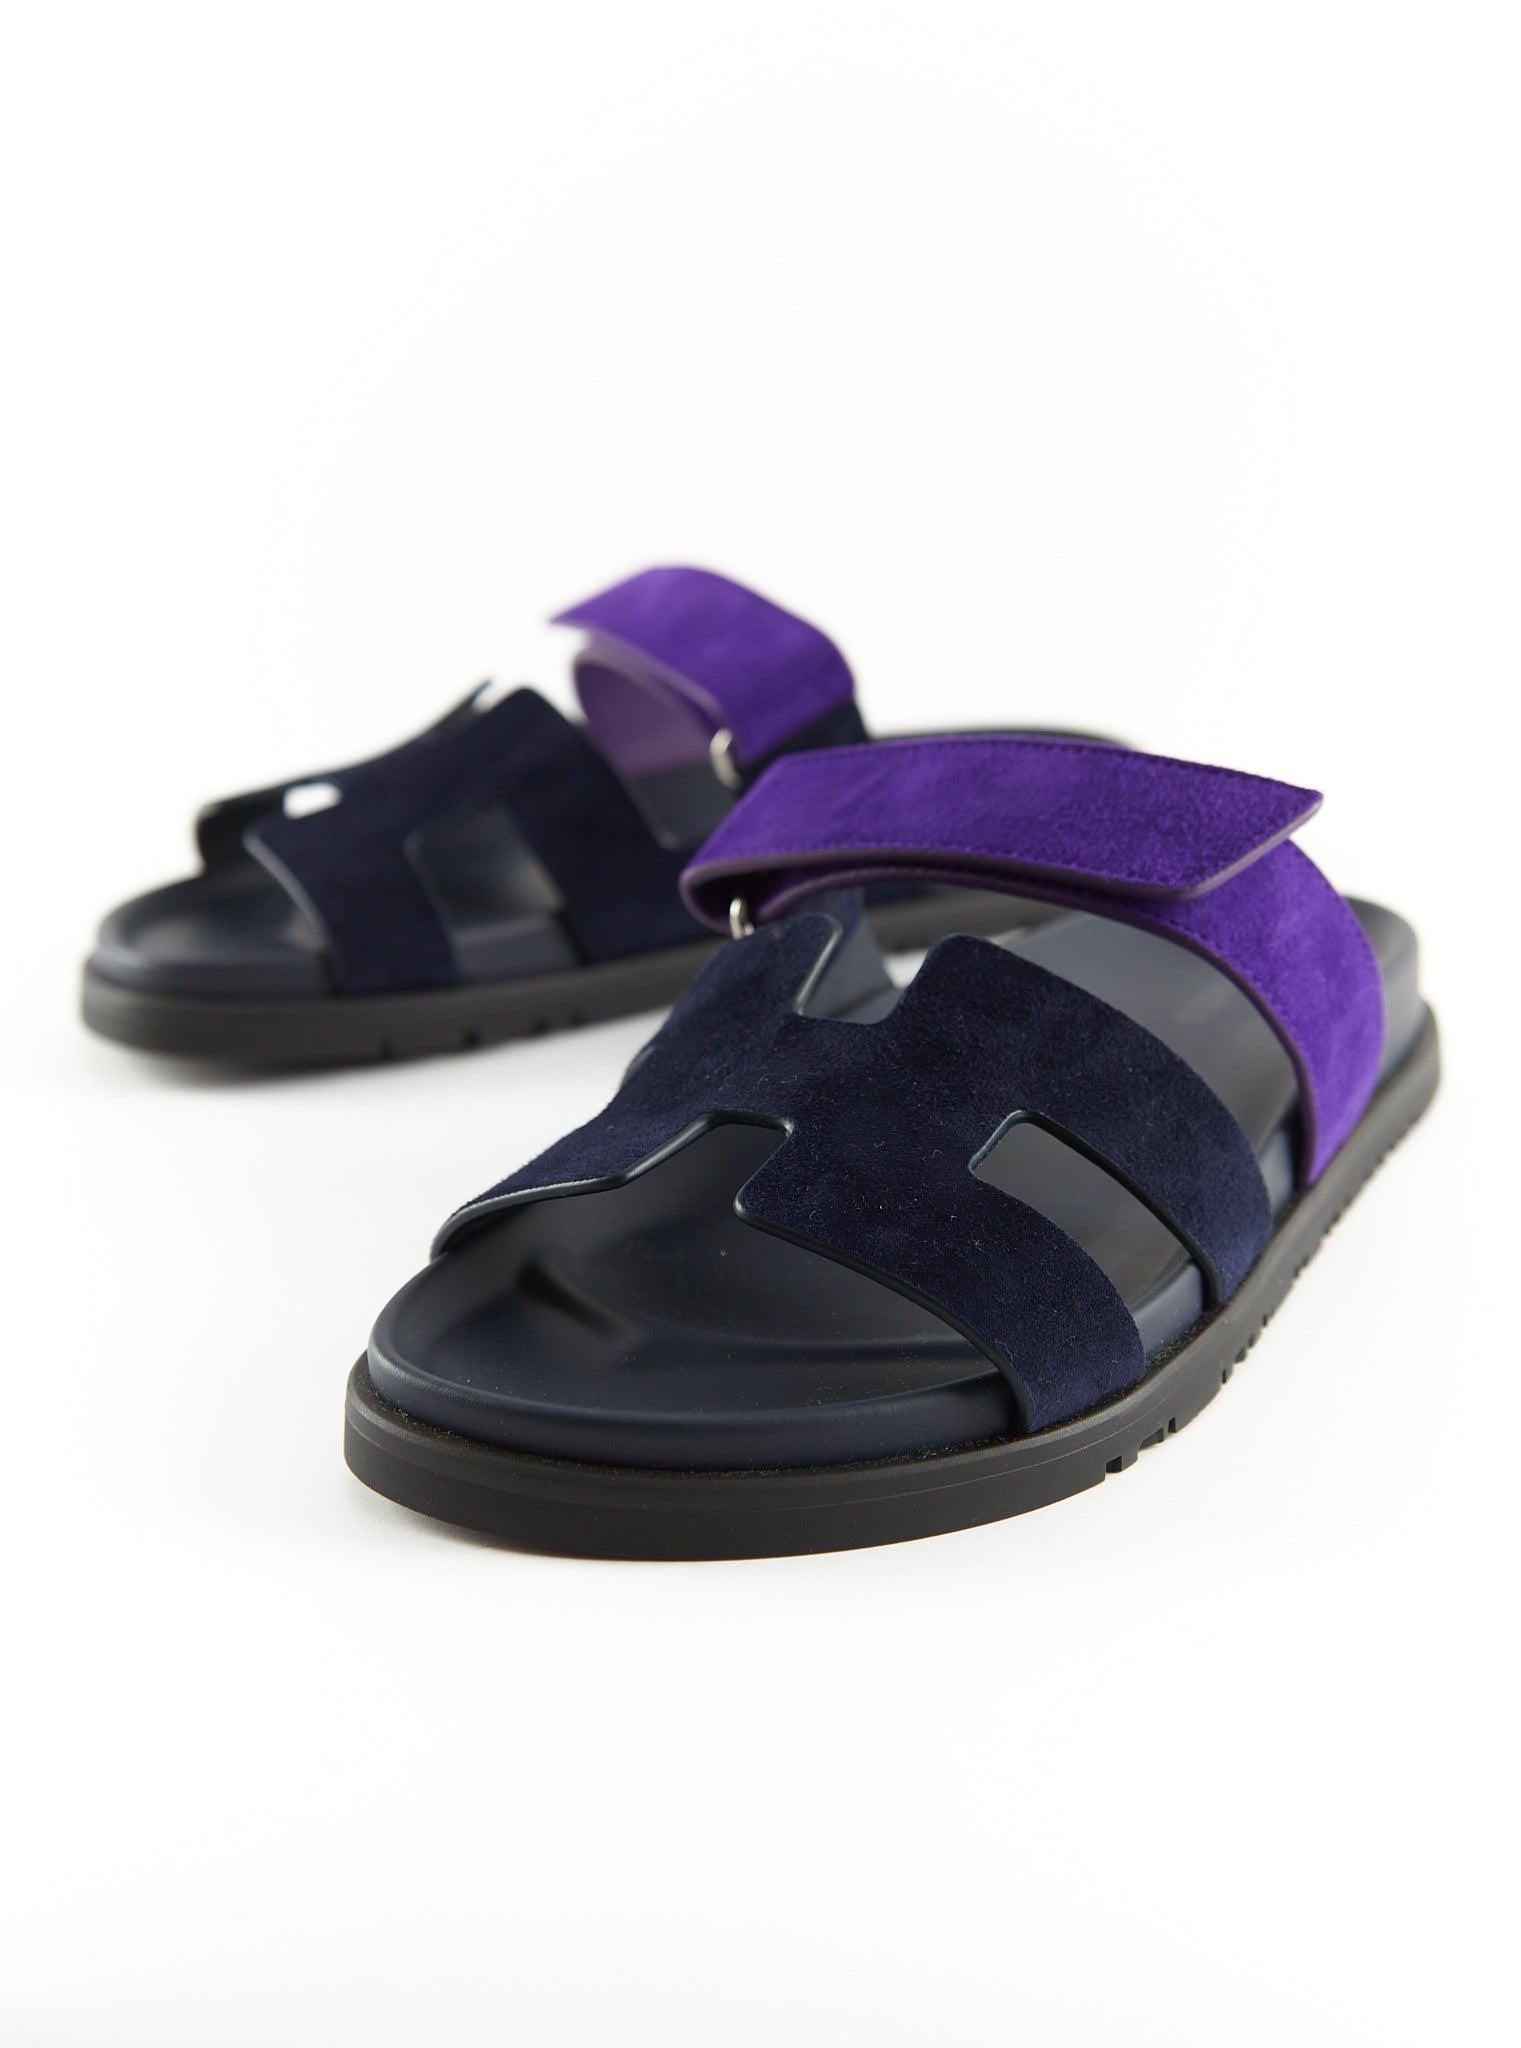 Hermès Techno-sandal in Violet Fonce and Majorette

Suede goatskin with anatomical rubber sole and adjustable strap

Made in Italy

Accompanied by: Hermès box, dust bags and ribbon

Size 37